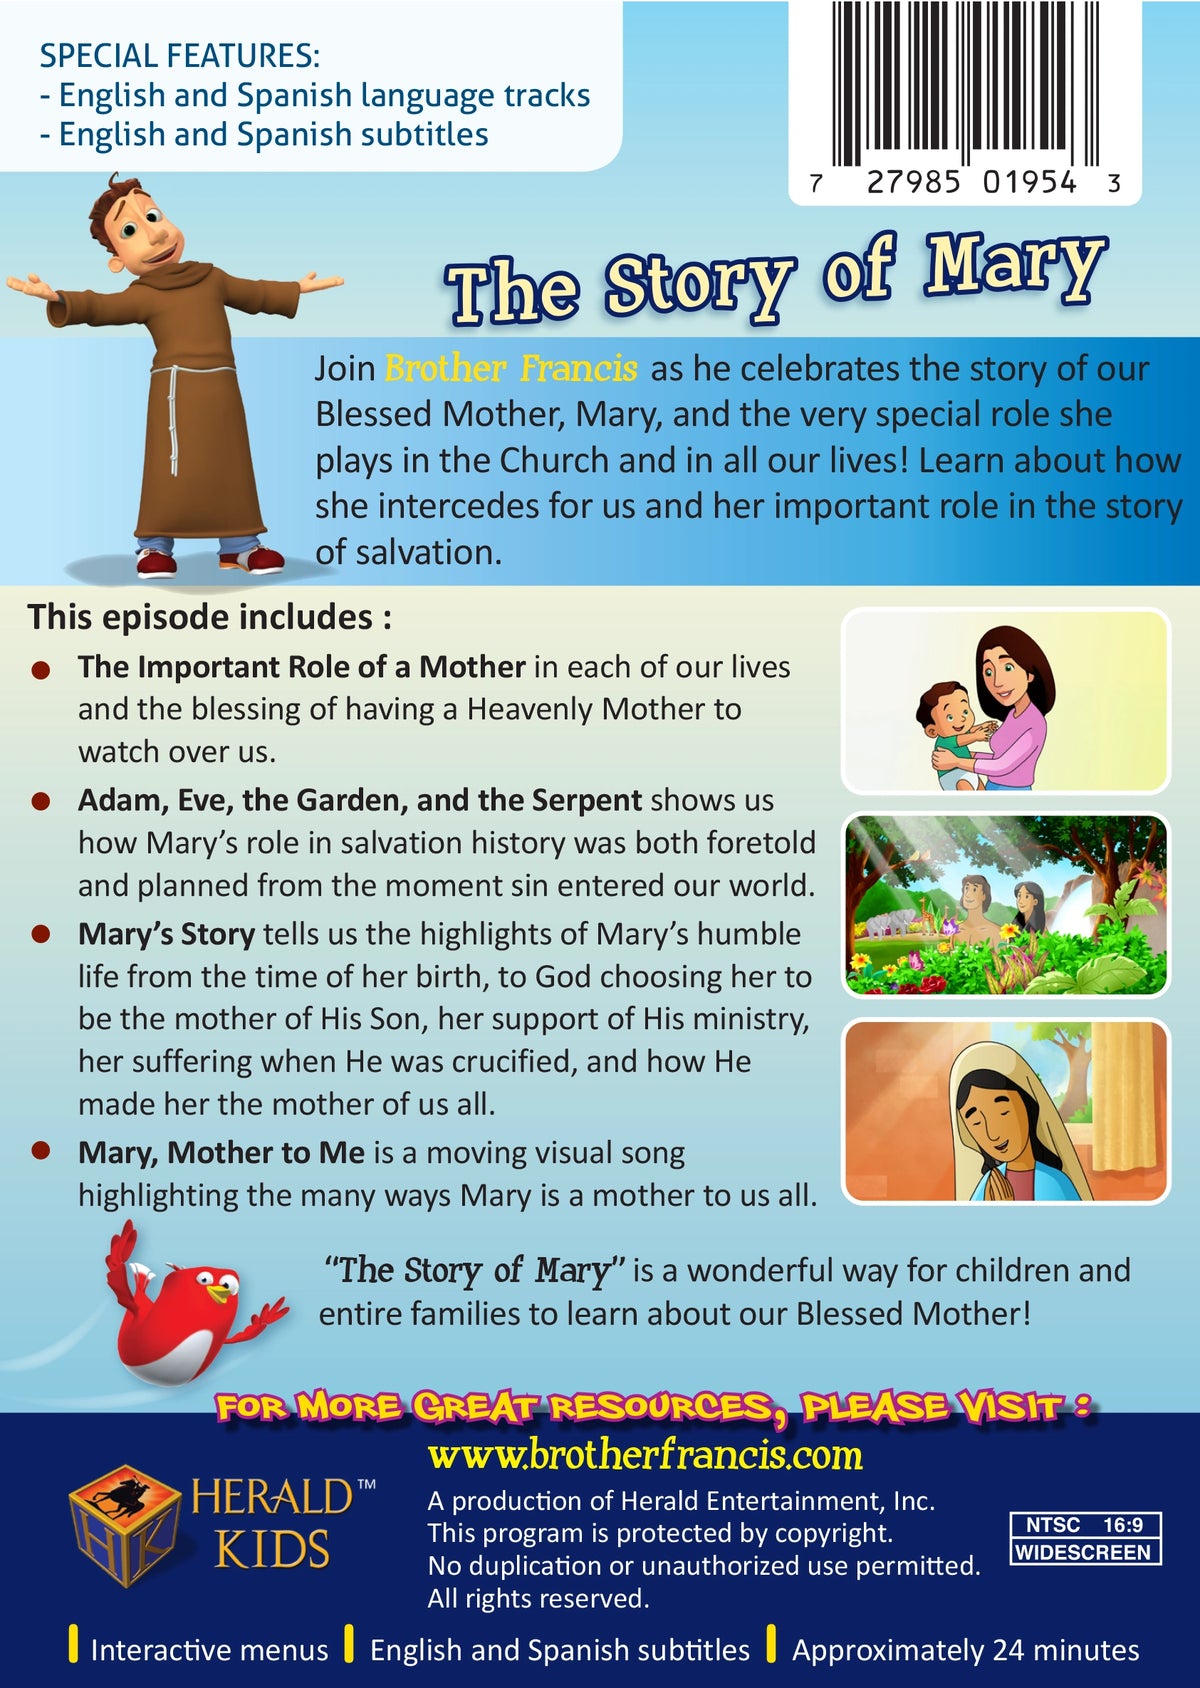 Brother Francis episode 21 DVD The Story of Mary Back Cover